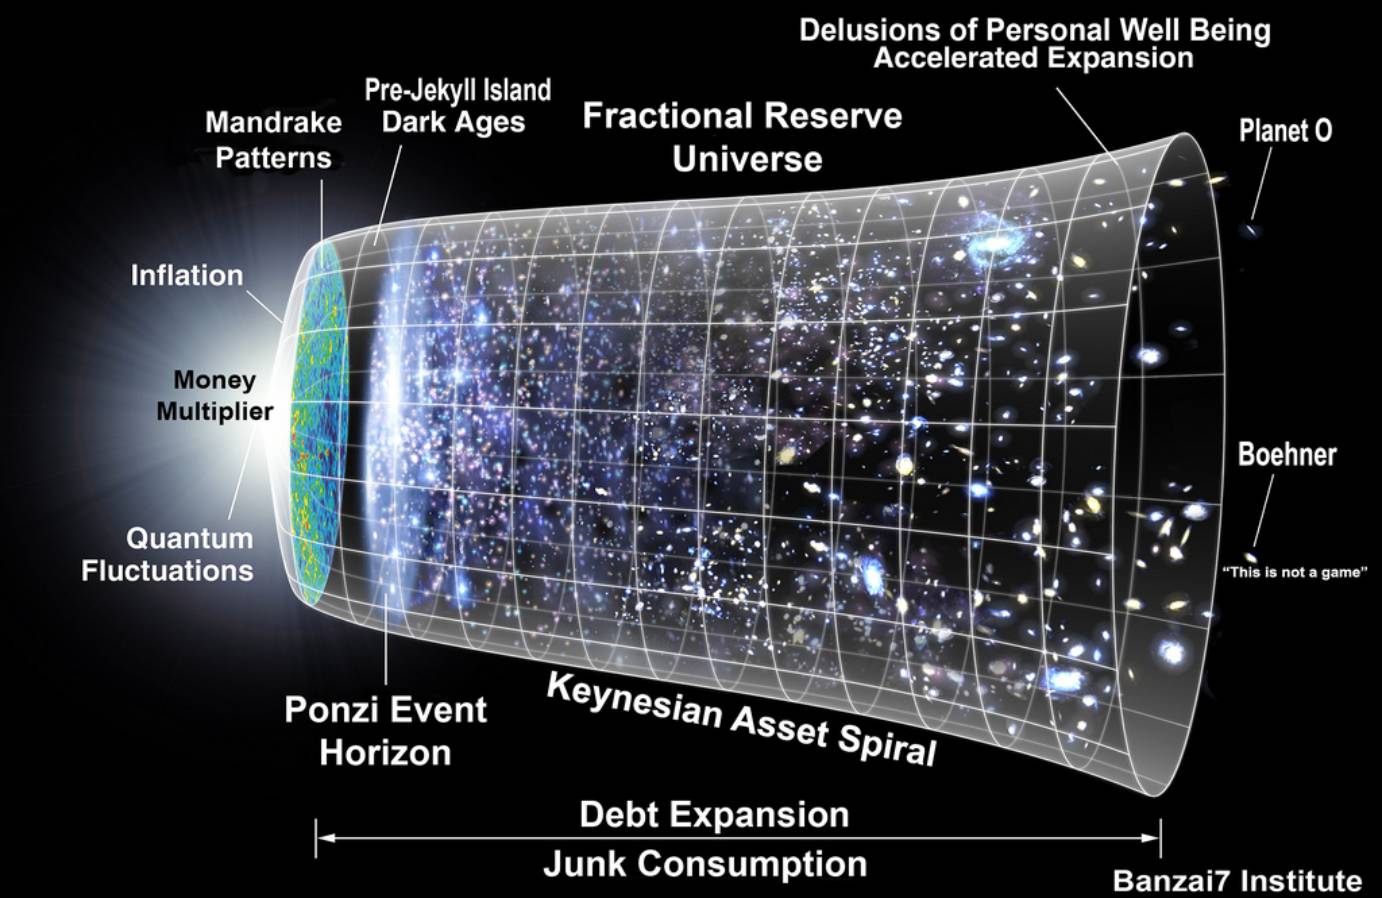 FRACTIONAL RESERVE UNIVERSE (Updated)